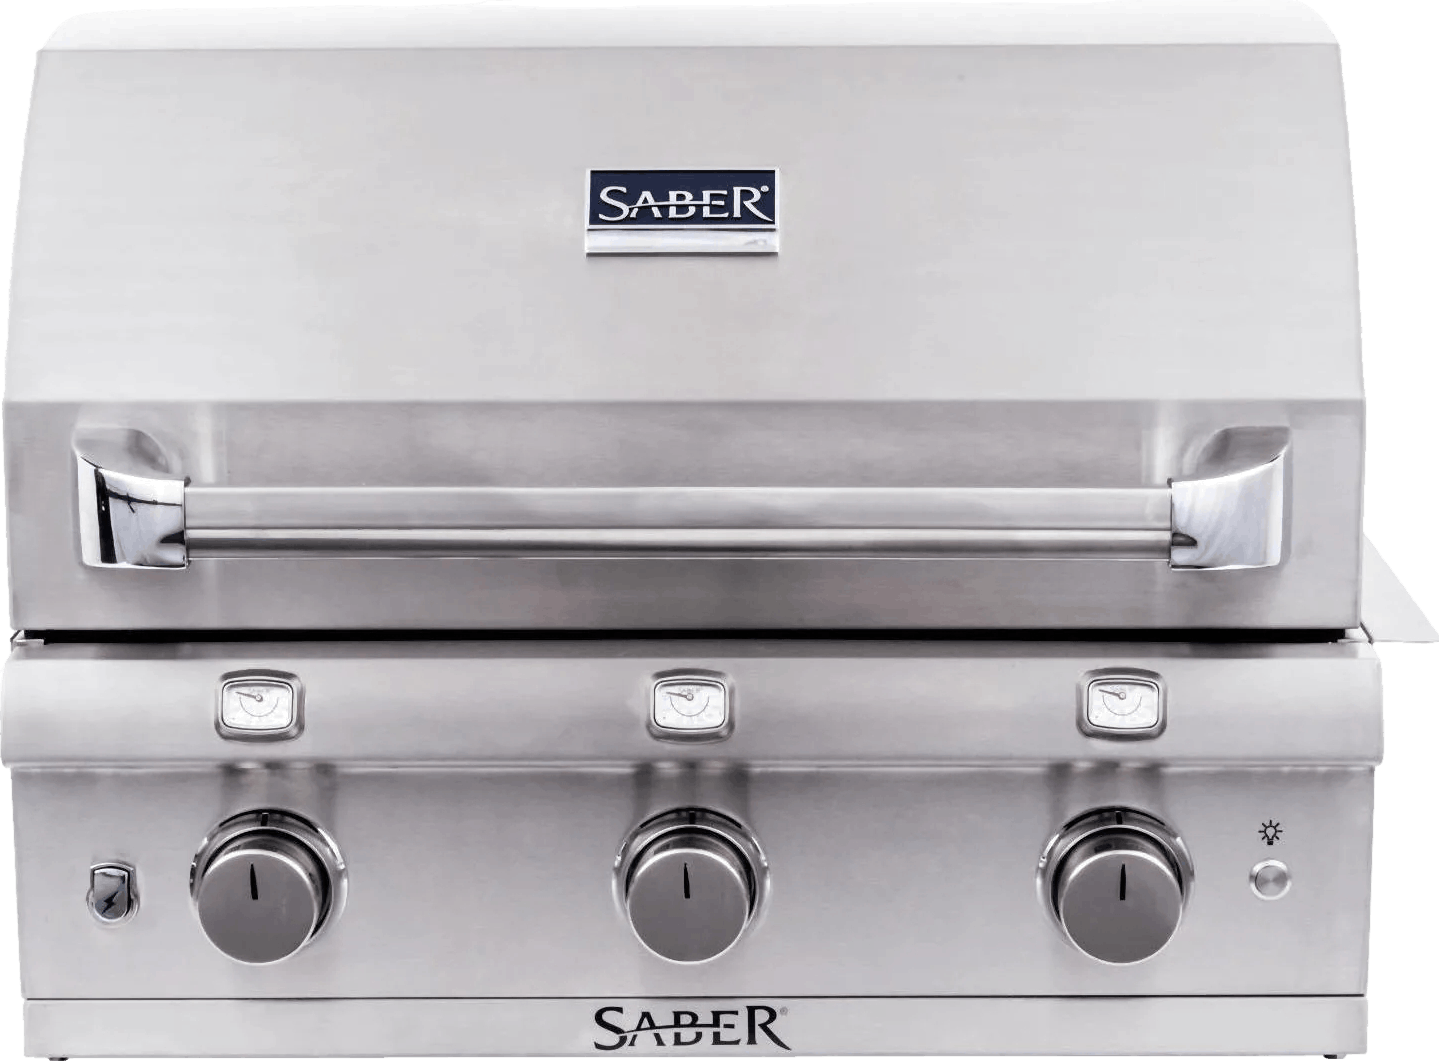 Saber Stainless Steel Steamer Tray